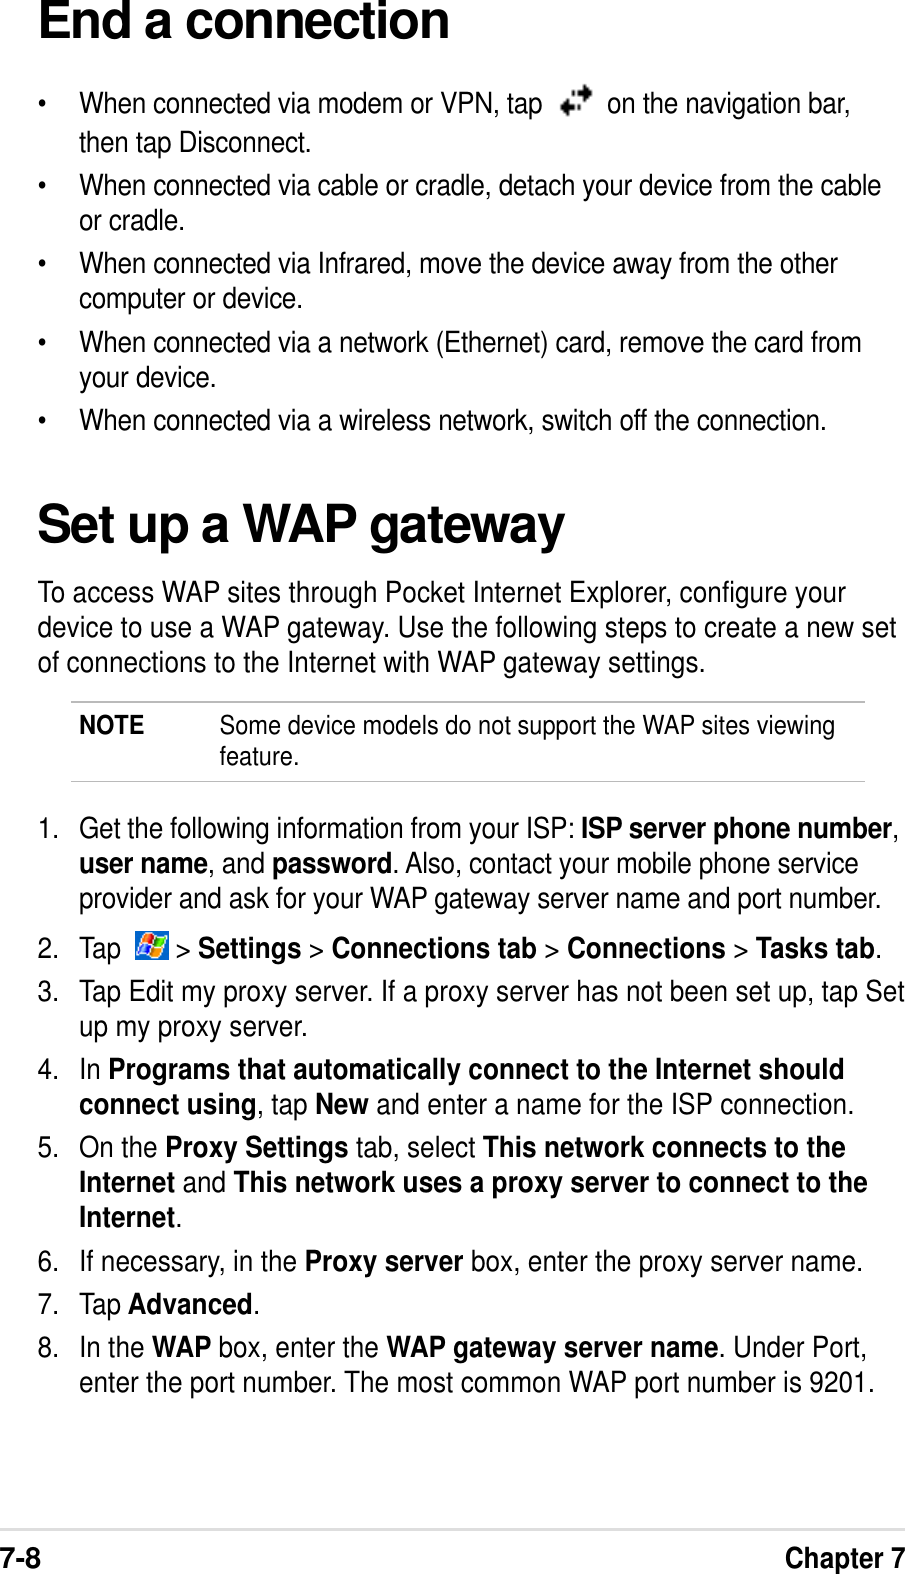 7-8Chapter 7End a connection•When connected via modem or VPN, tap    on the navigation bar,then tap Disconnect.•When connected via cable or cradle, detach your device from the cableor cradle.•When connected via Infrared, move the device away from the othercomputer or device.•When connected via a network (Ethernet) card, remove the card fromyour device.•When connected via a wireless network, switch off the connection.Set up a WAP gatewayTo access WAP sites through Pocket Internet Explorer, configure yourdevice to use a WAP gateway. Use the following steps to create a new setof connections to the Internet with WAP gateway settings.NOTE Some device models do not support the WAP sites viewingfeature.1. Get the following information from your ISP: ISP server phone number,user name, and password. Also, contact your mobile phone serviceprovider and ask for your WAP gateway server name and port number.2. Tap    &gt; Settings &gt; Connections tab &gt; Connections &gt; Tasks tab.3. Tap Edit my proxy server. If a proxy server has not been set up, tap Setup my proxy server.4. In Programs that automatically connect to the Internet shouldconnect using, tap New and enter a name for the ISP connection.5. On the Proxy Settings tab, select This network connects to theInternet and This network uses a proxy server to connect to theInternet.6. If necessary, in the Proxy server box, enter the proxy server name.7. Tap Advanced.8. In the WAP box, enter the WAP gateway server name. Under Port,enter the port number. The most common WAP port number is 9201.